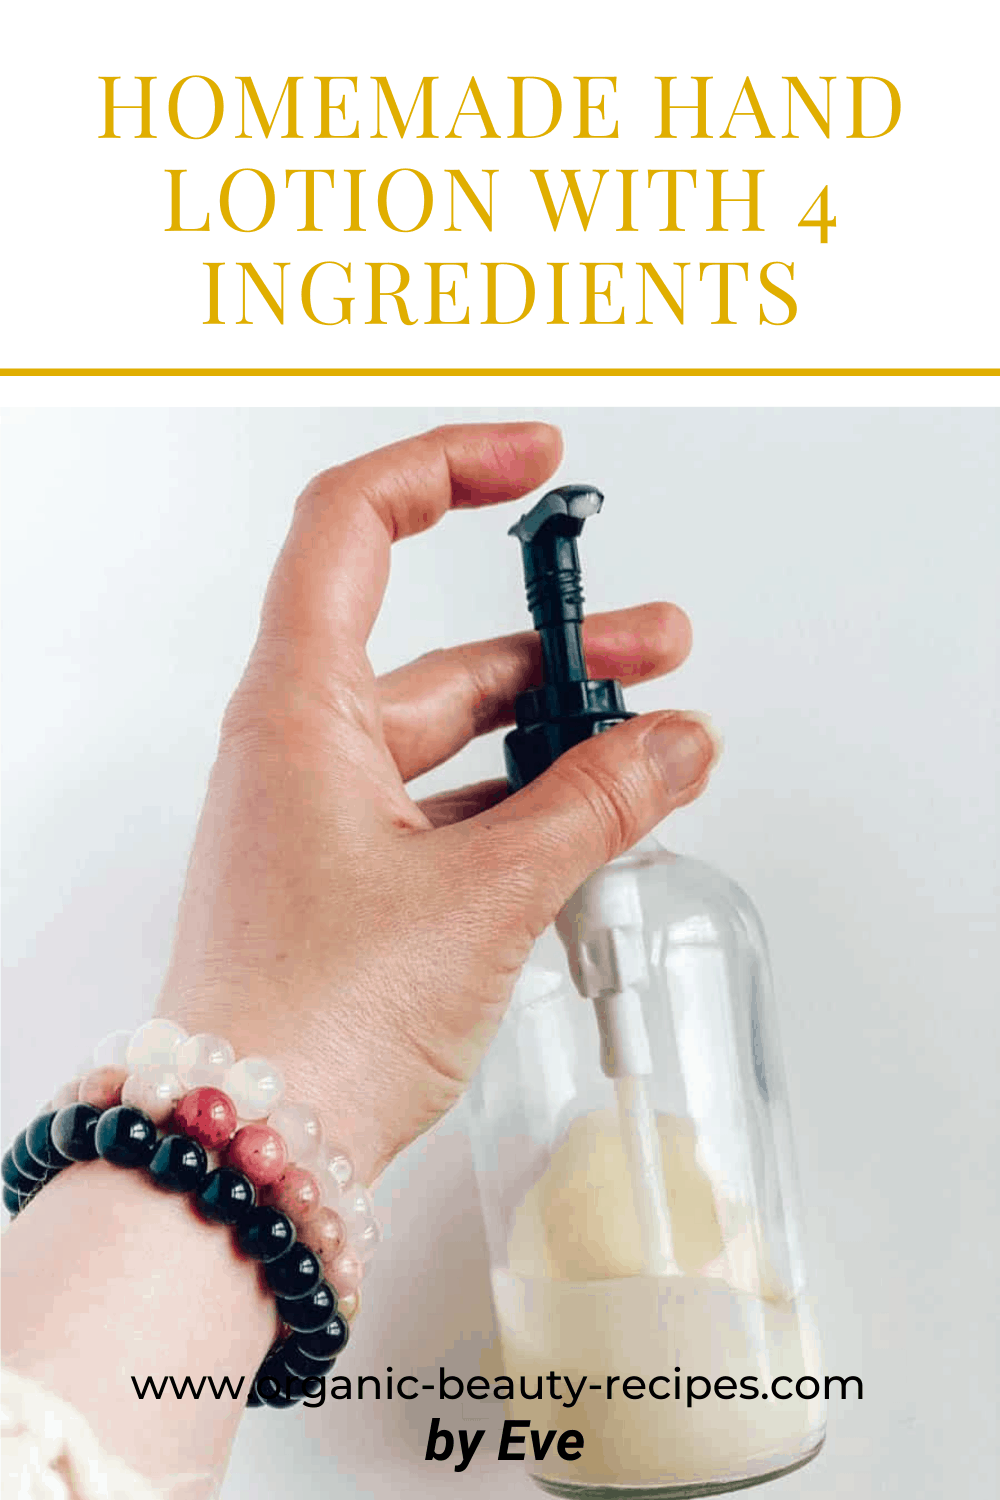 Homemade Hand Lotion with 4 ingredients